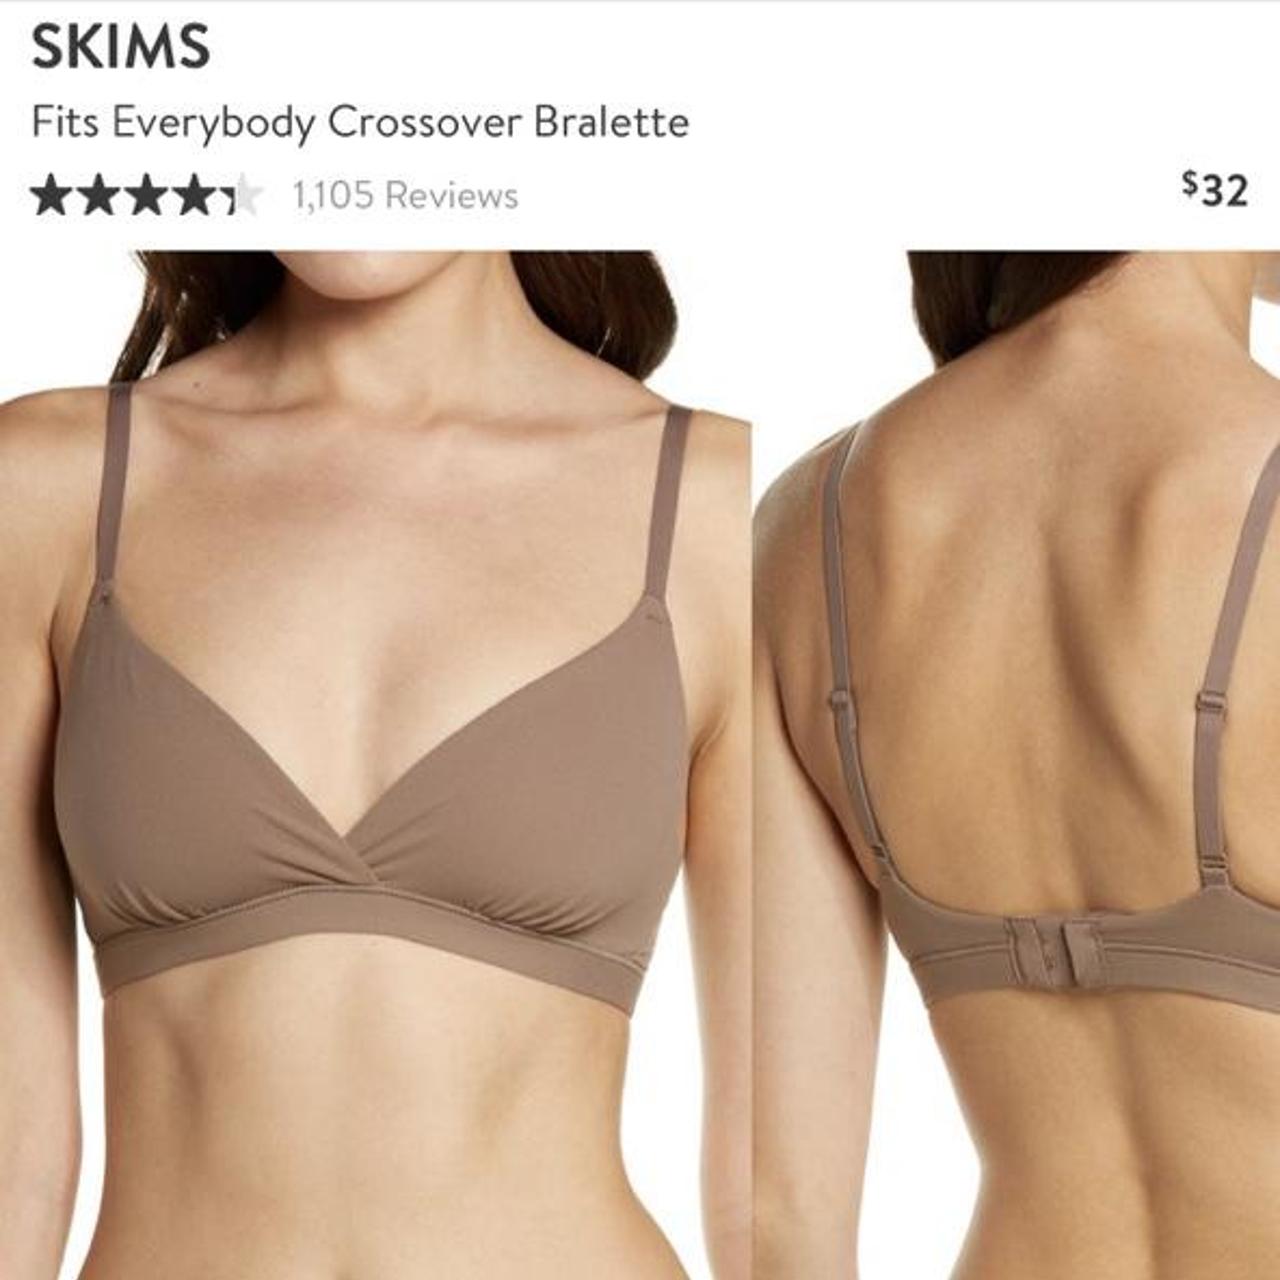 Skims Fits Everybody Crossover Bralette In Brown